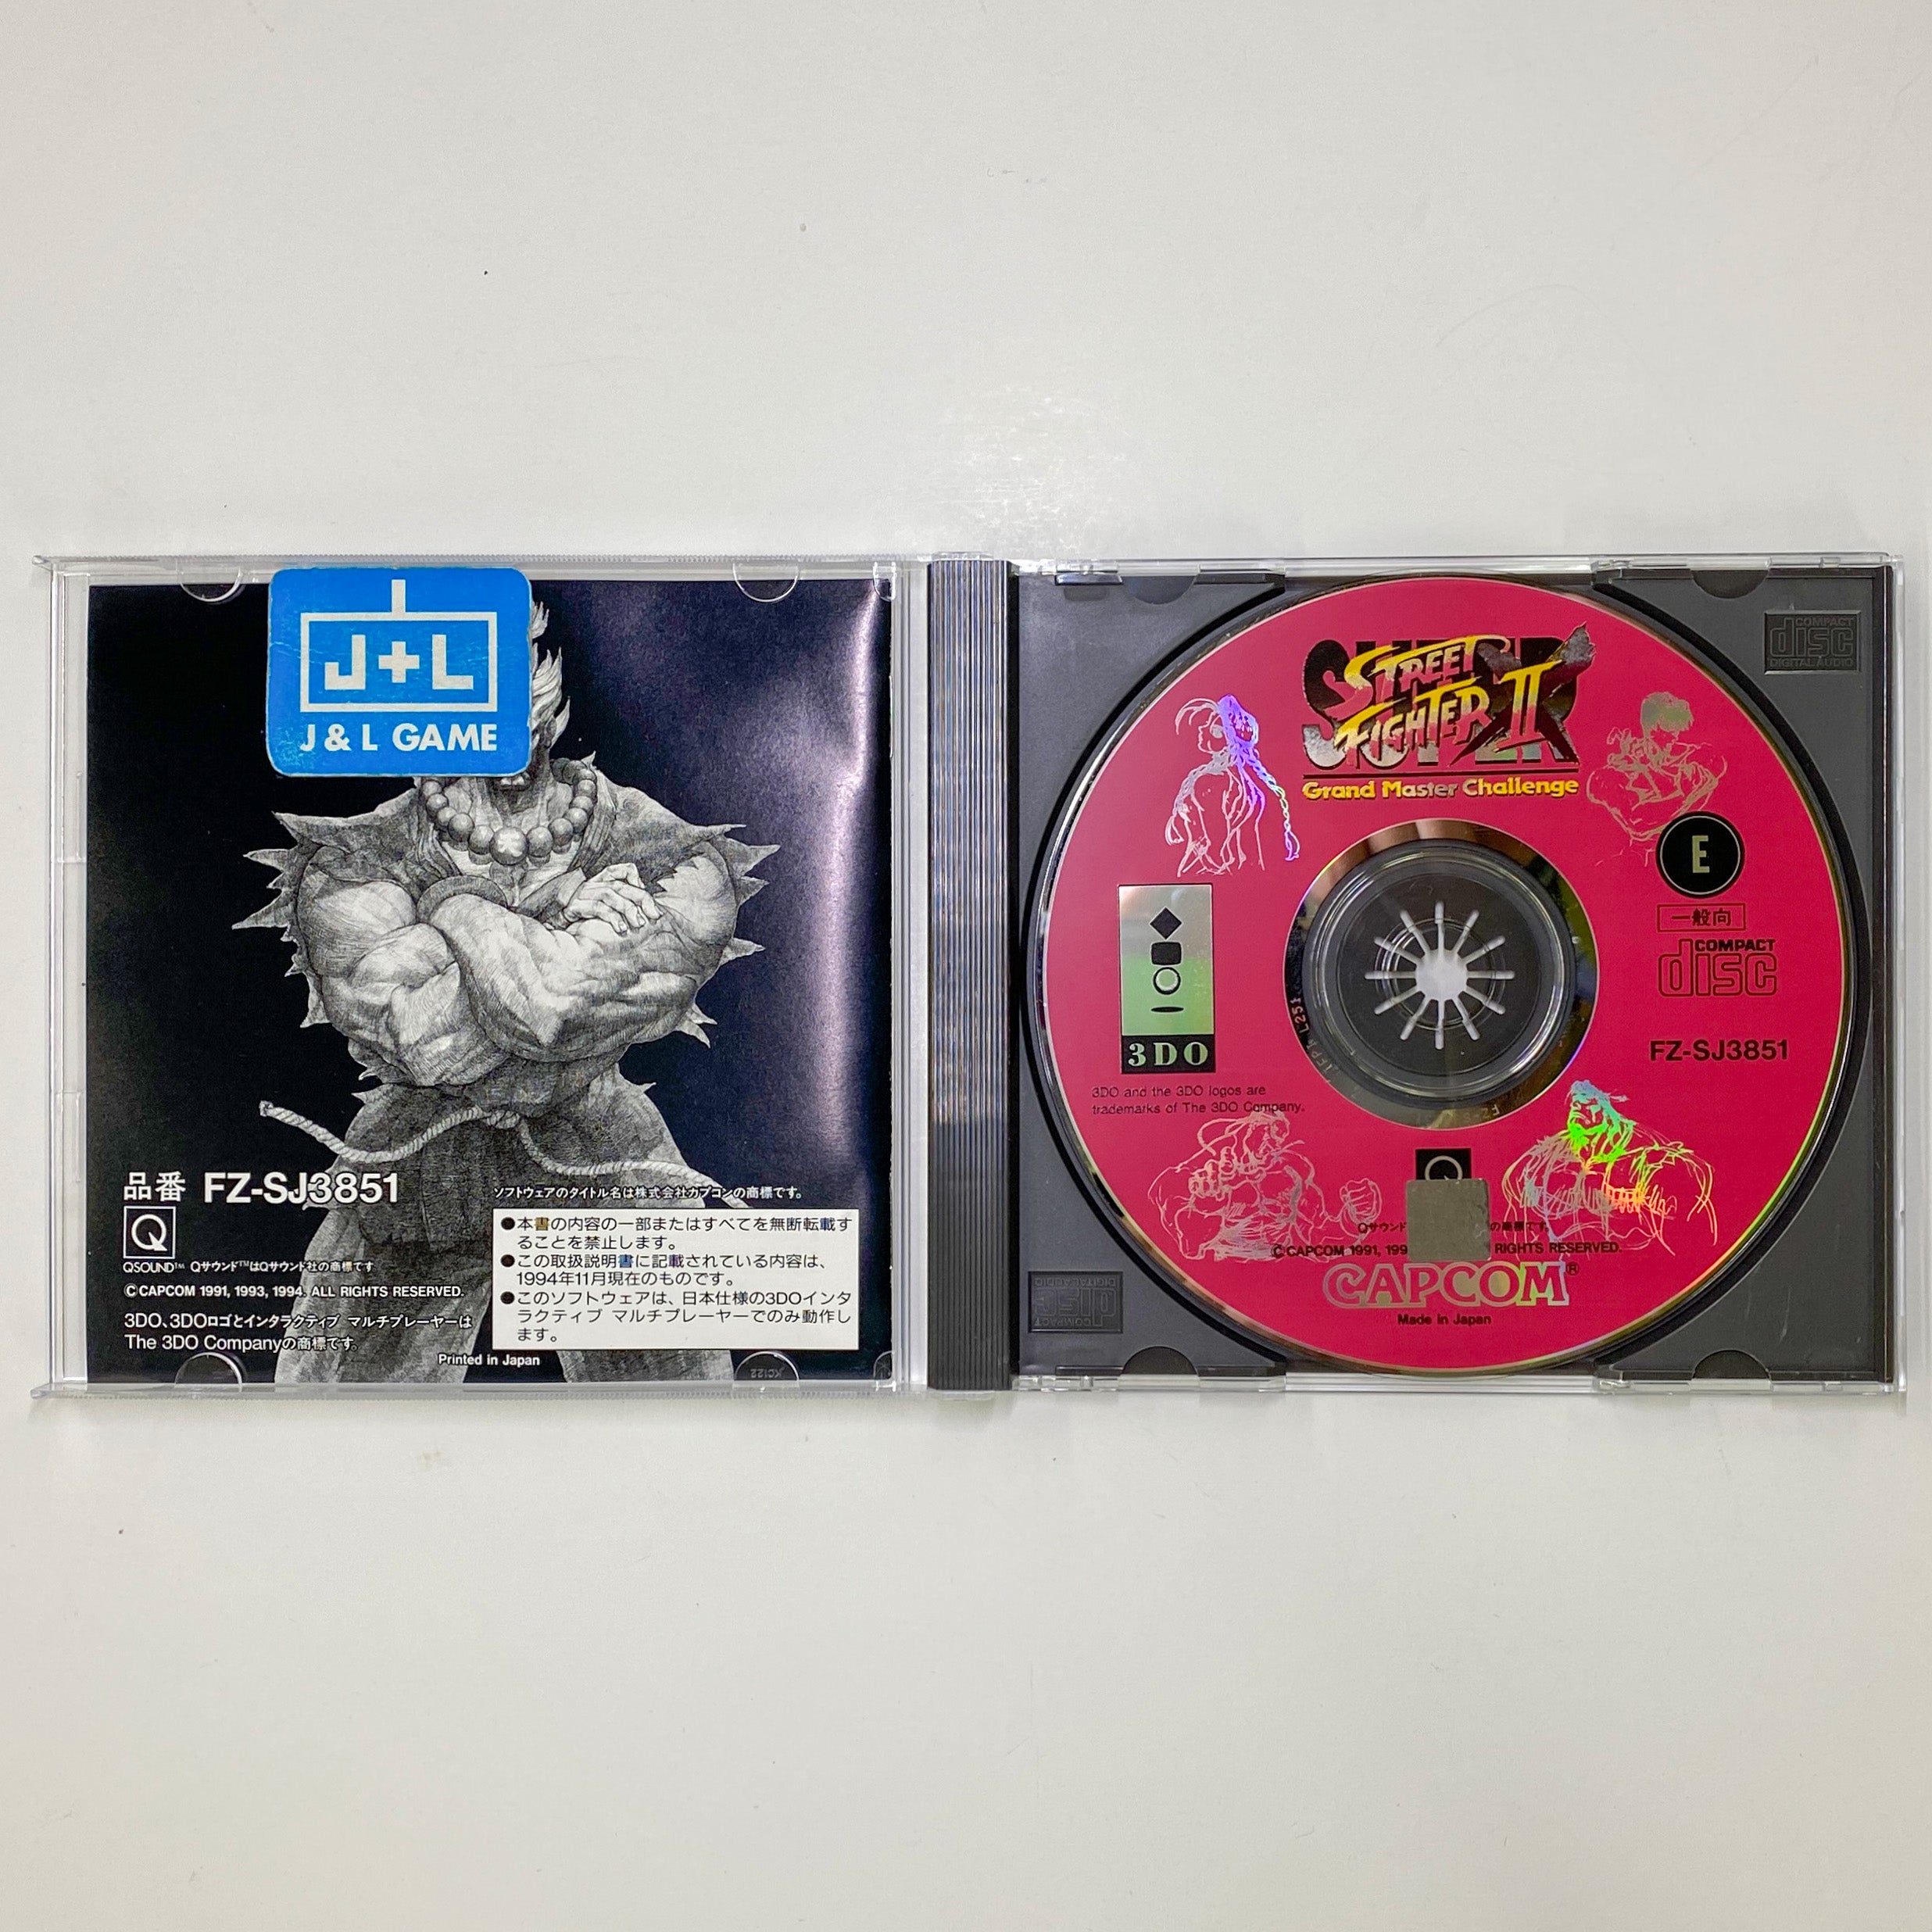 Super Street Fighter II X - 3DO Interactive Multiplayer (Japanese Import)  [Pre-Owned]